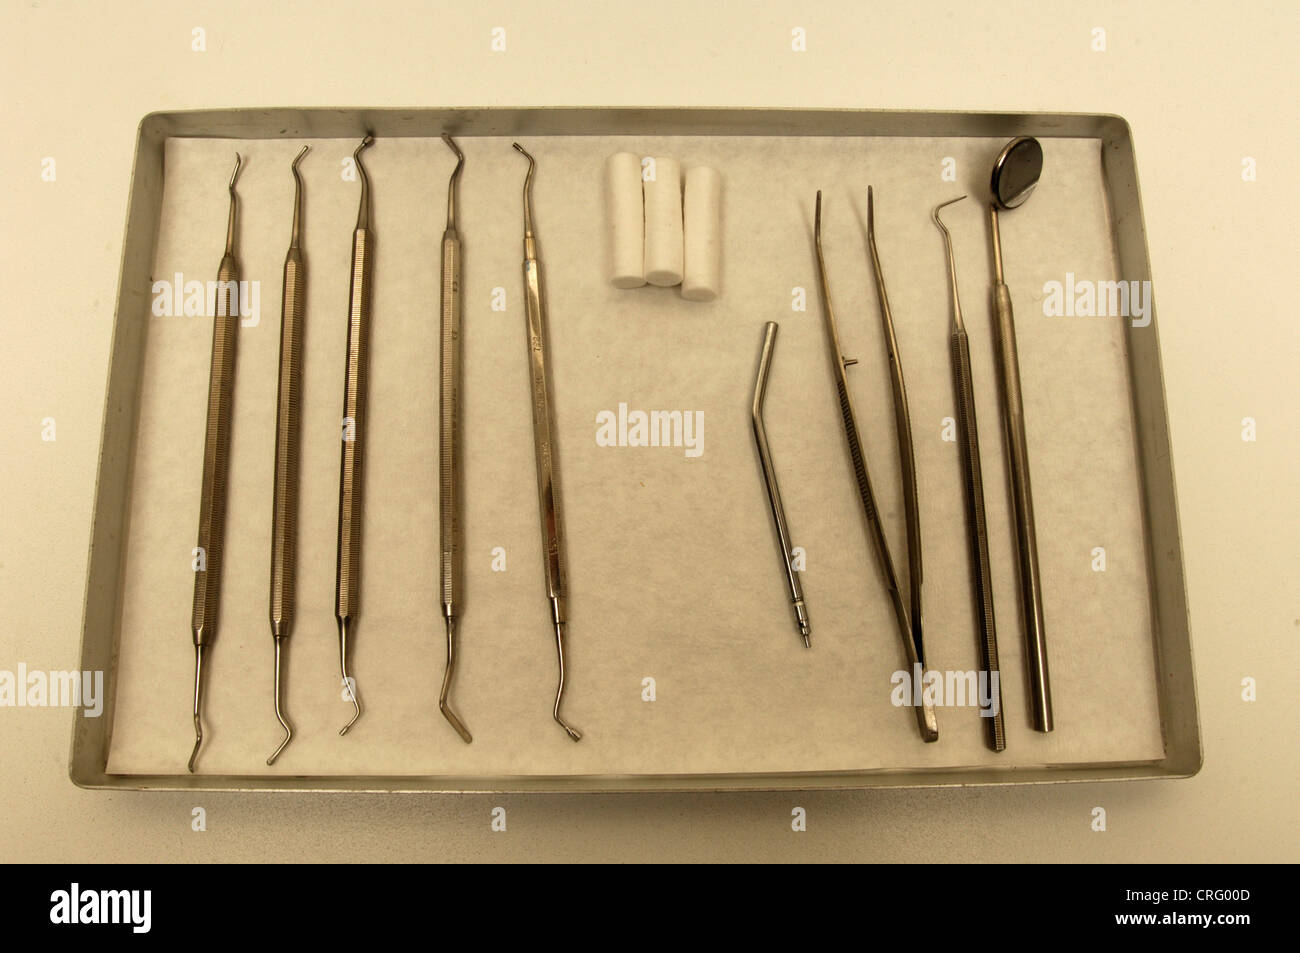 A tray of dental equipment including dental picks, scrapers and an angled mirror. Stock Photo